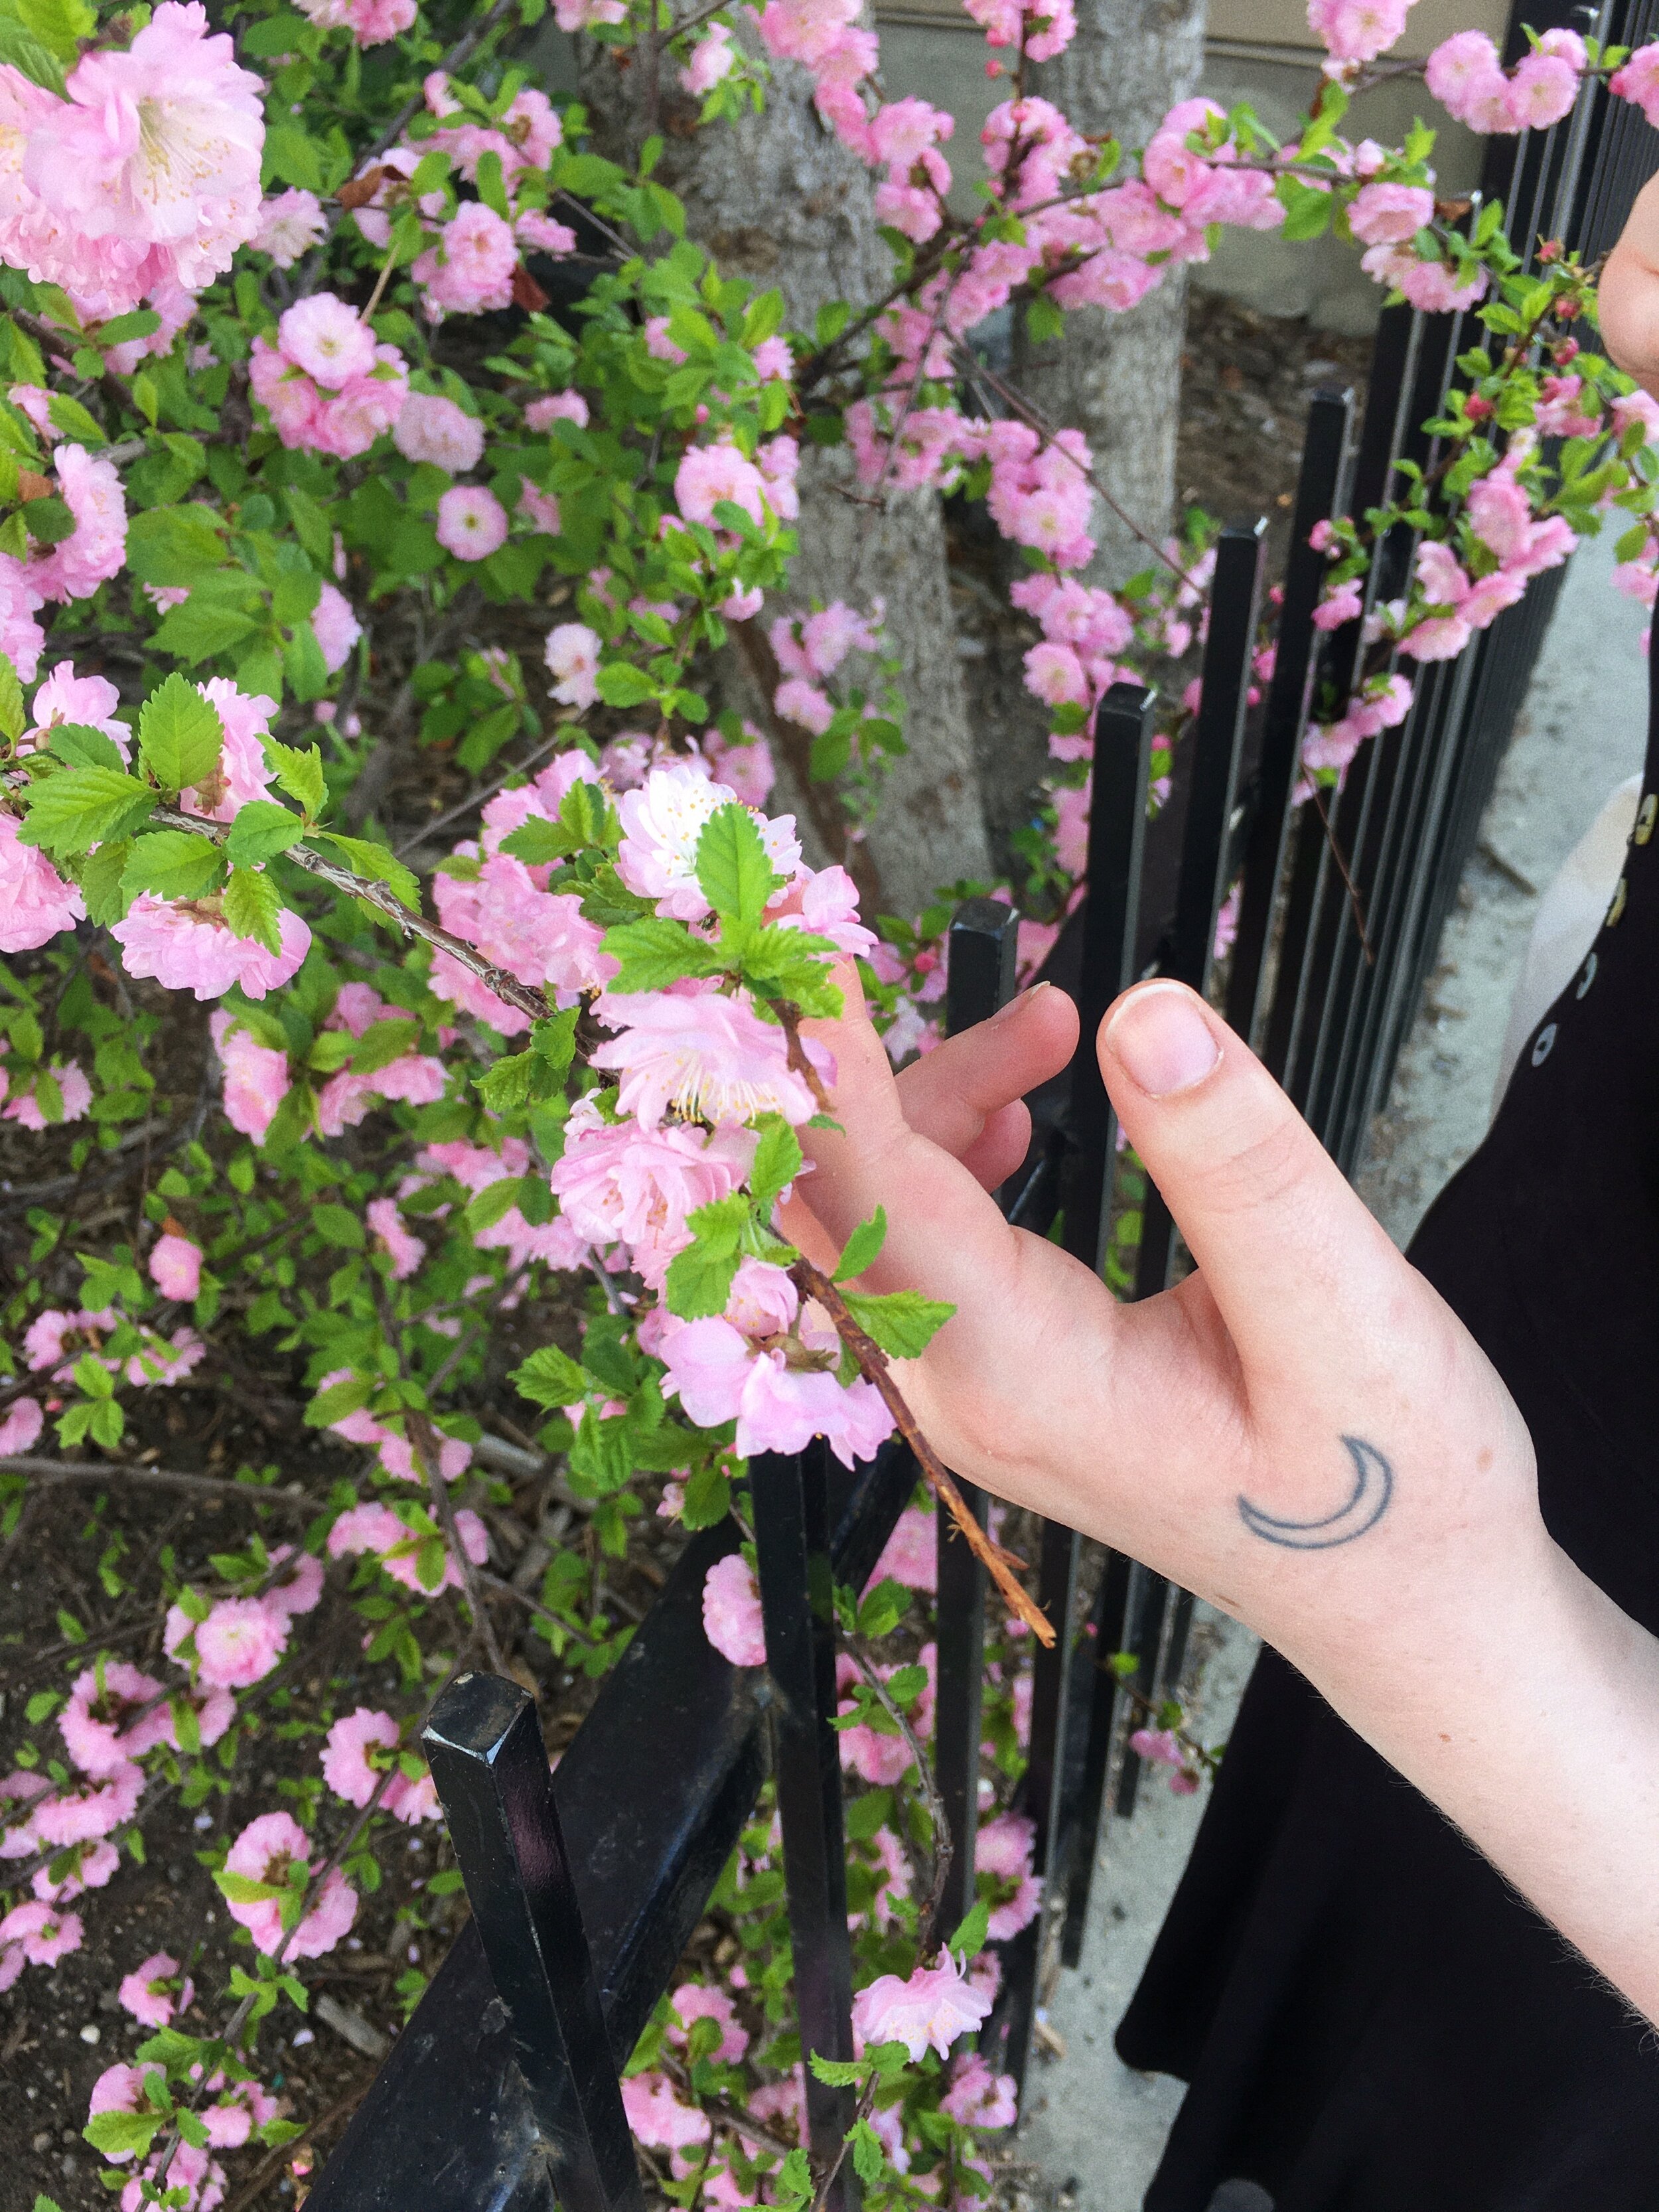 a photo taken while on a walk with my lovely friend aleximage description: a hand with a tattoo of a moon below the thumbs gently holds the branch of a bush with pink flowers and green leaves on it.